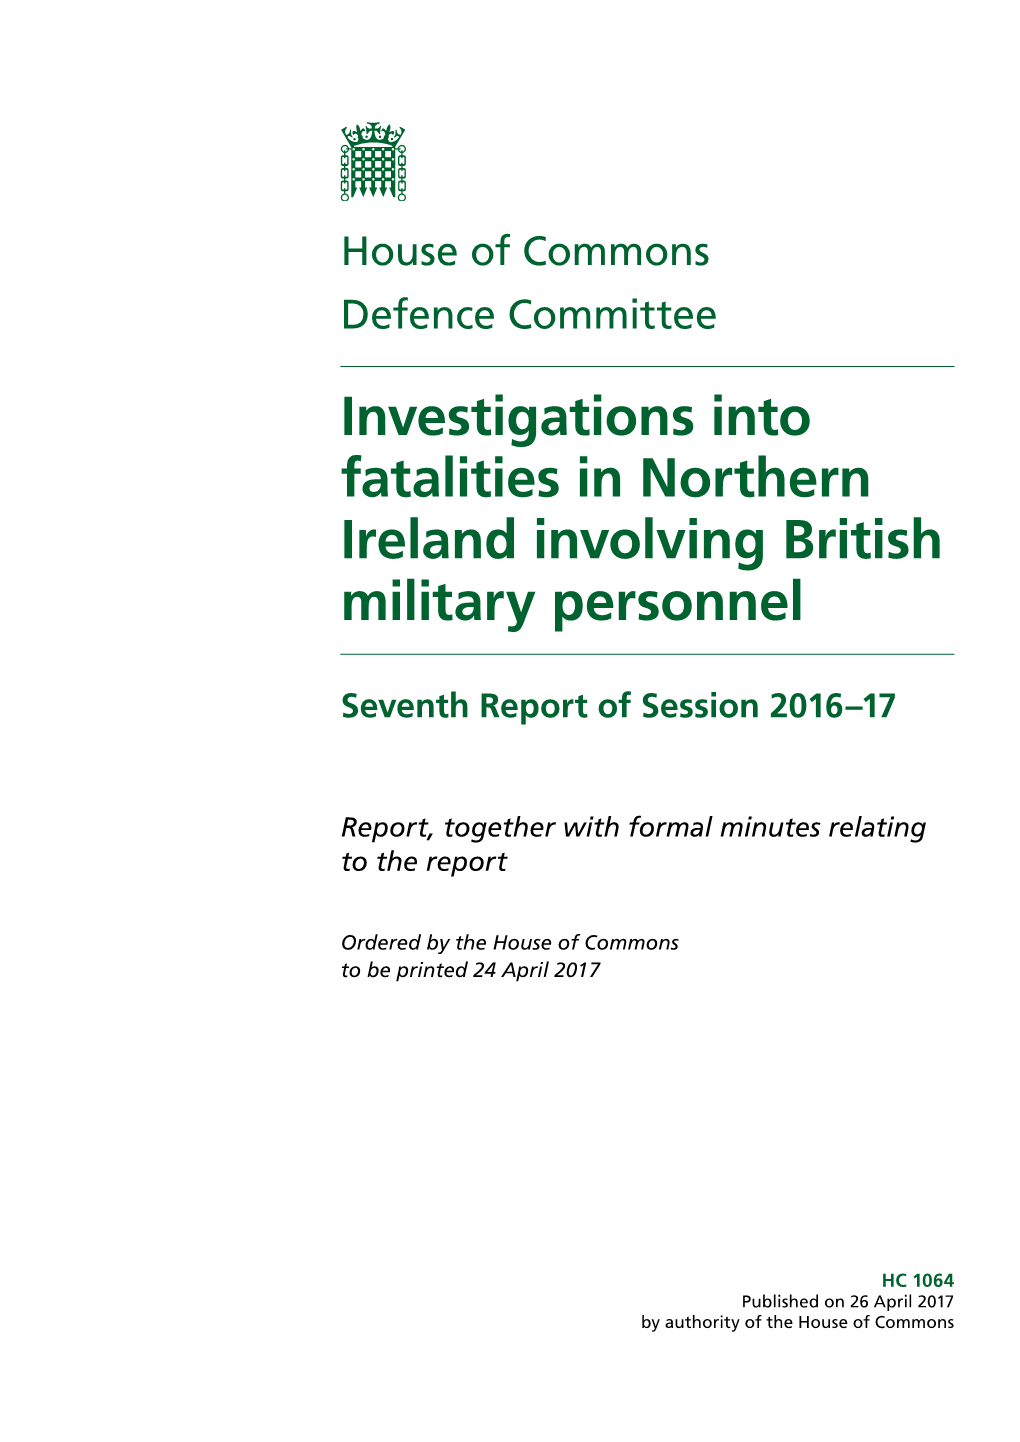 Investigations Into Fatalities in Northern Ireland Involving British Military Personnel